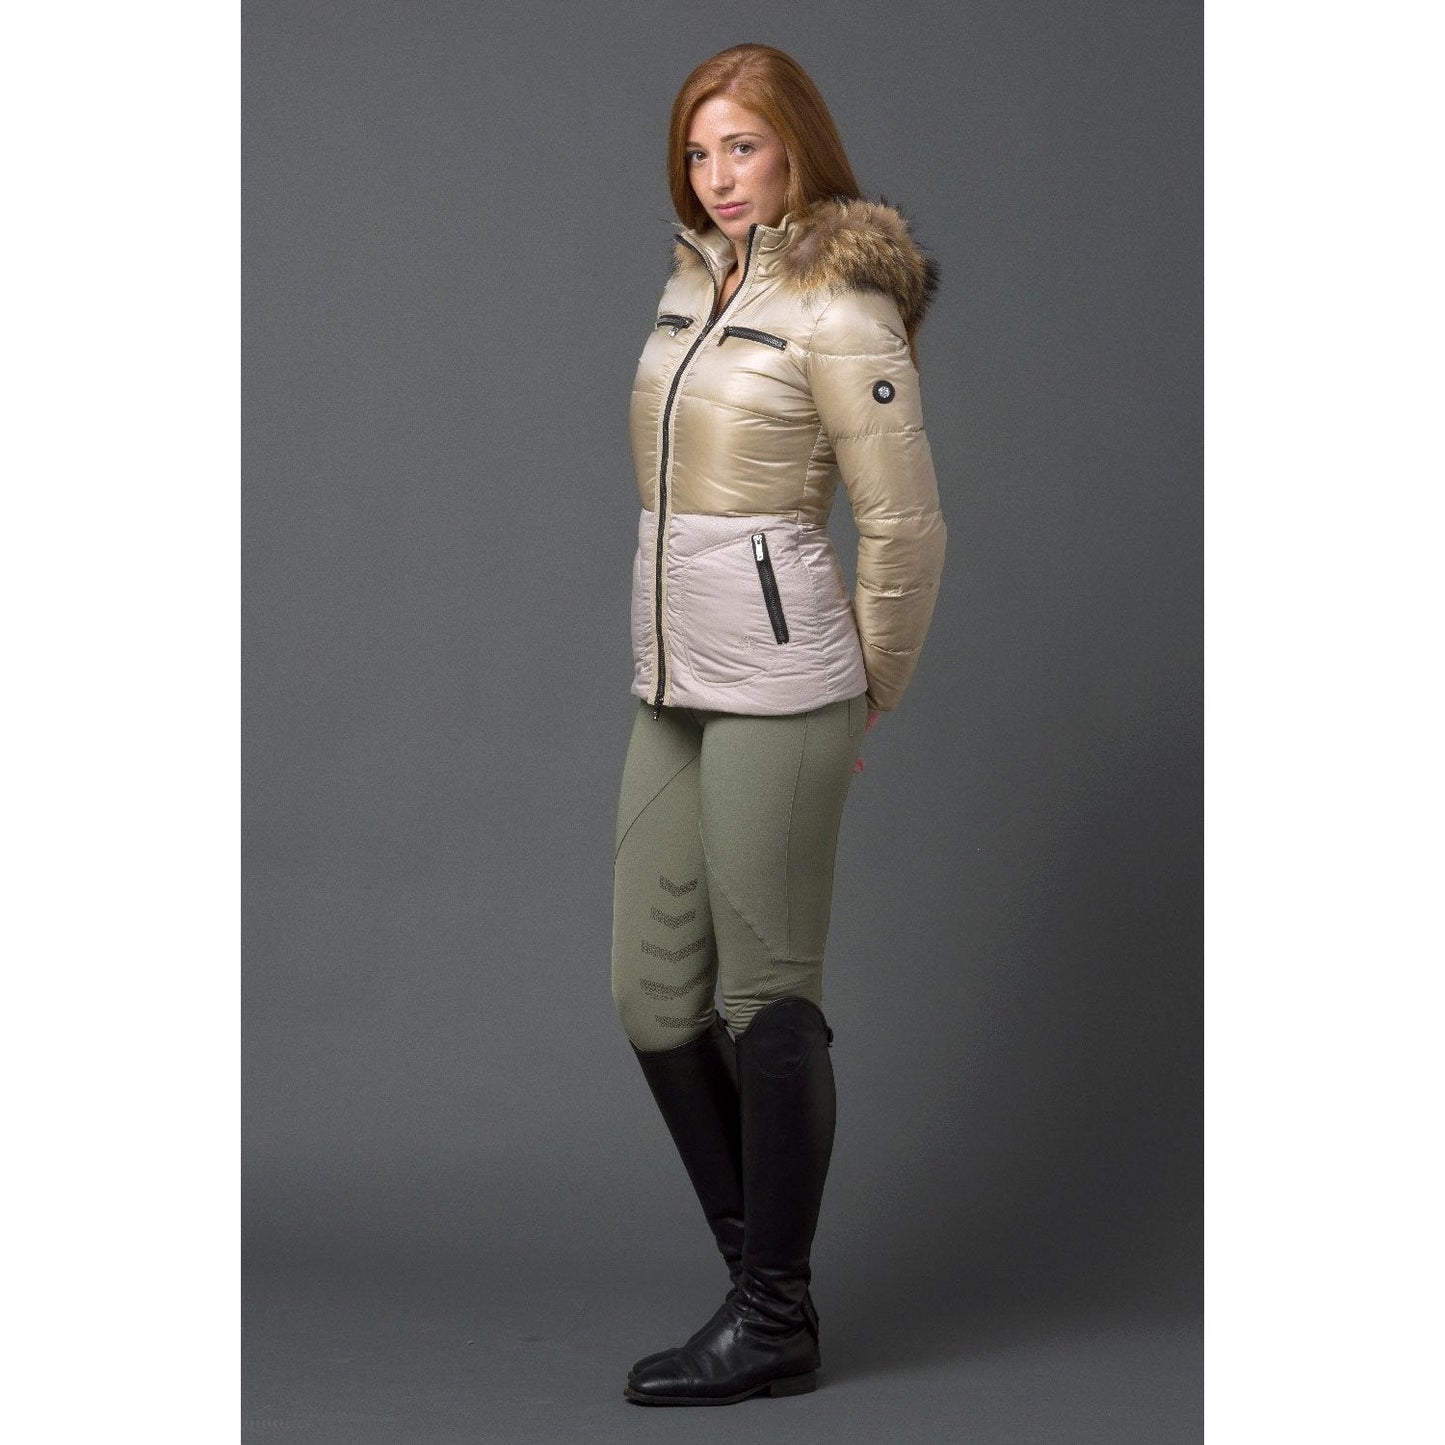 Joshua Jones Lucie Jacket-Trailrace Equestrian Outfitters-The Equestrian